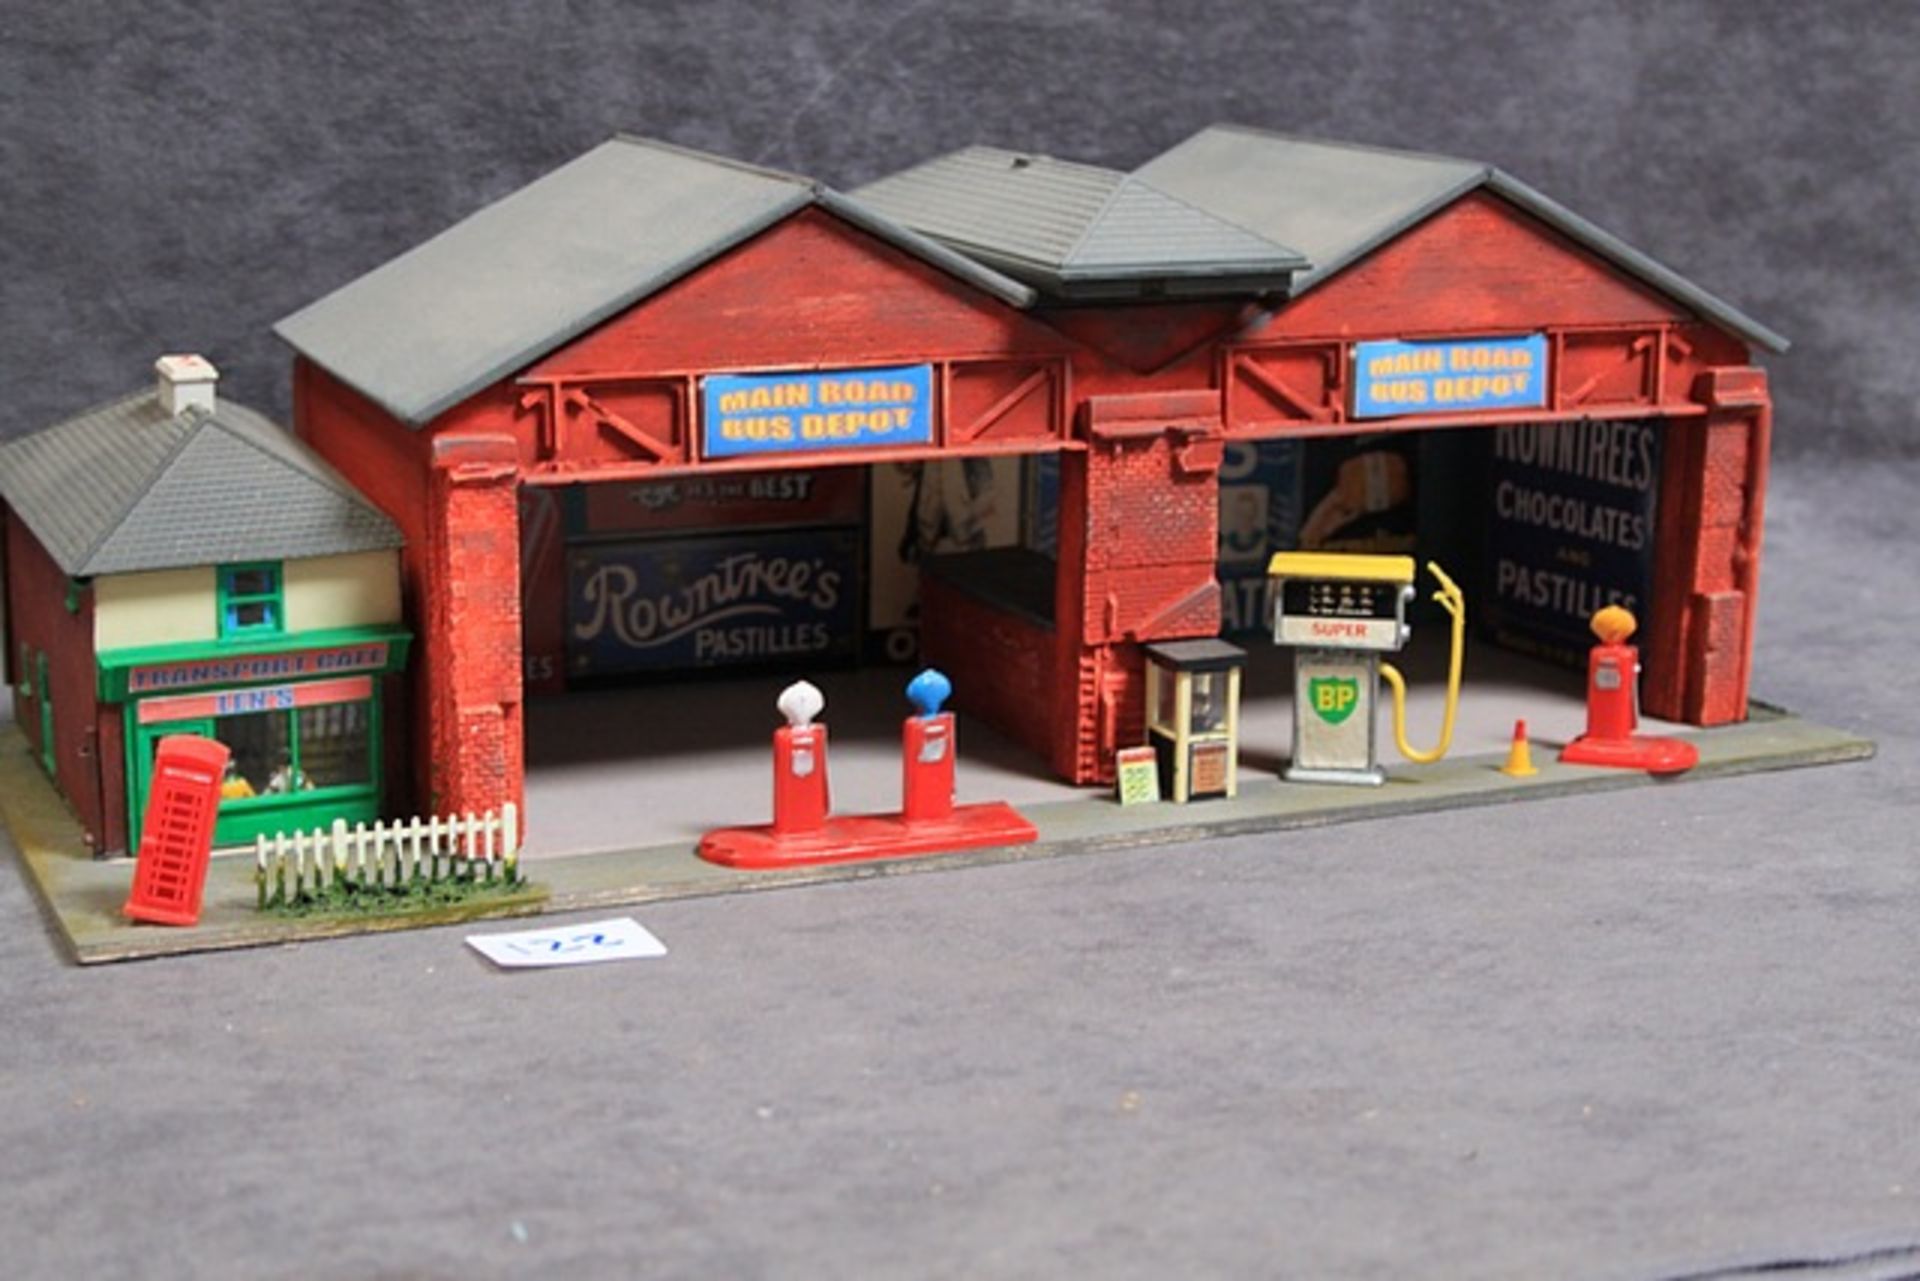 Wood Constructed Model Of Main Road Bus Depot With Petrol Pumps, Figures Forecourt And Transport - Image 3 of 3